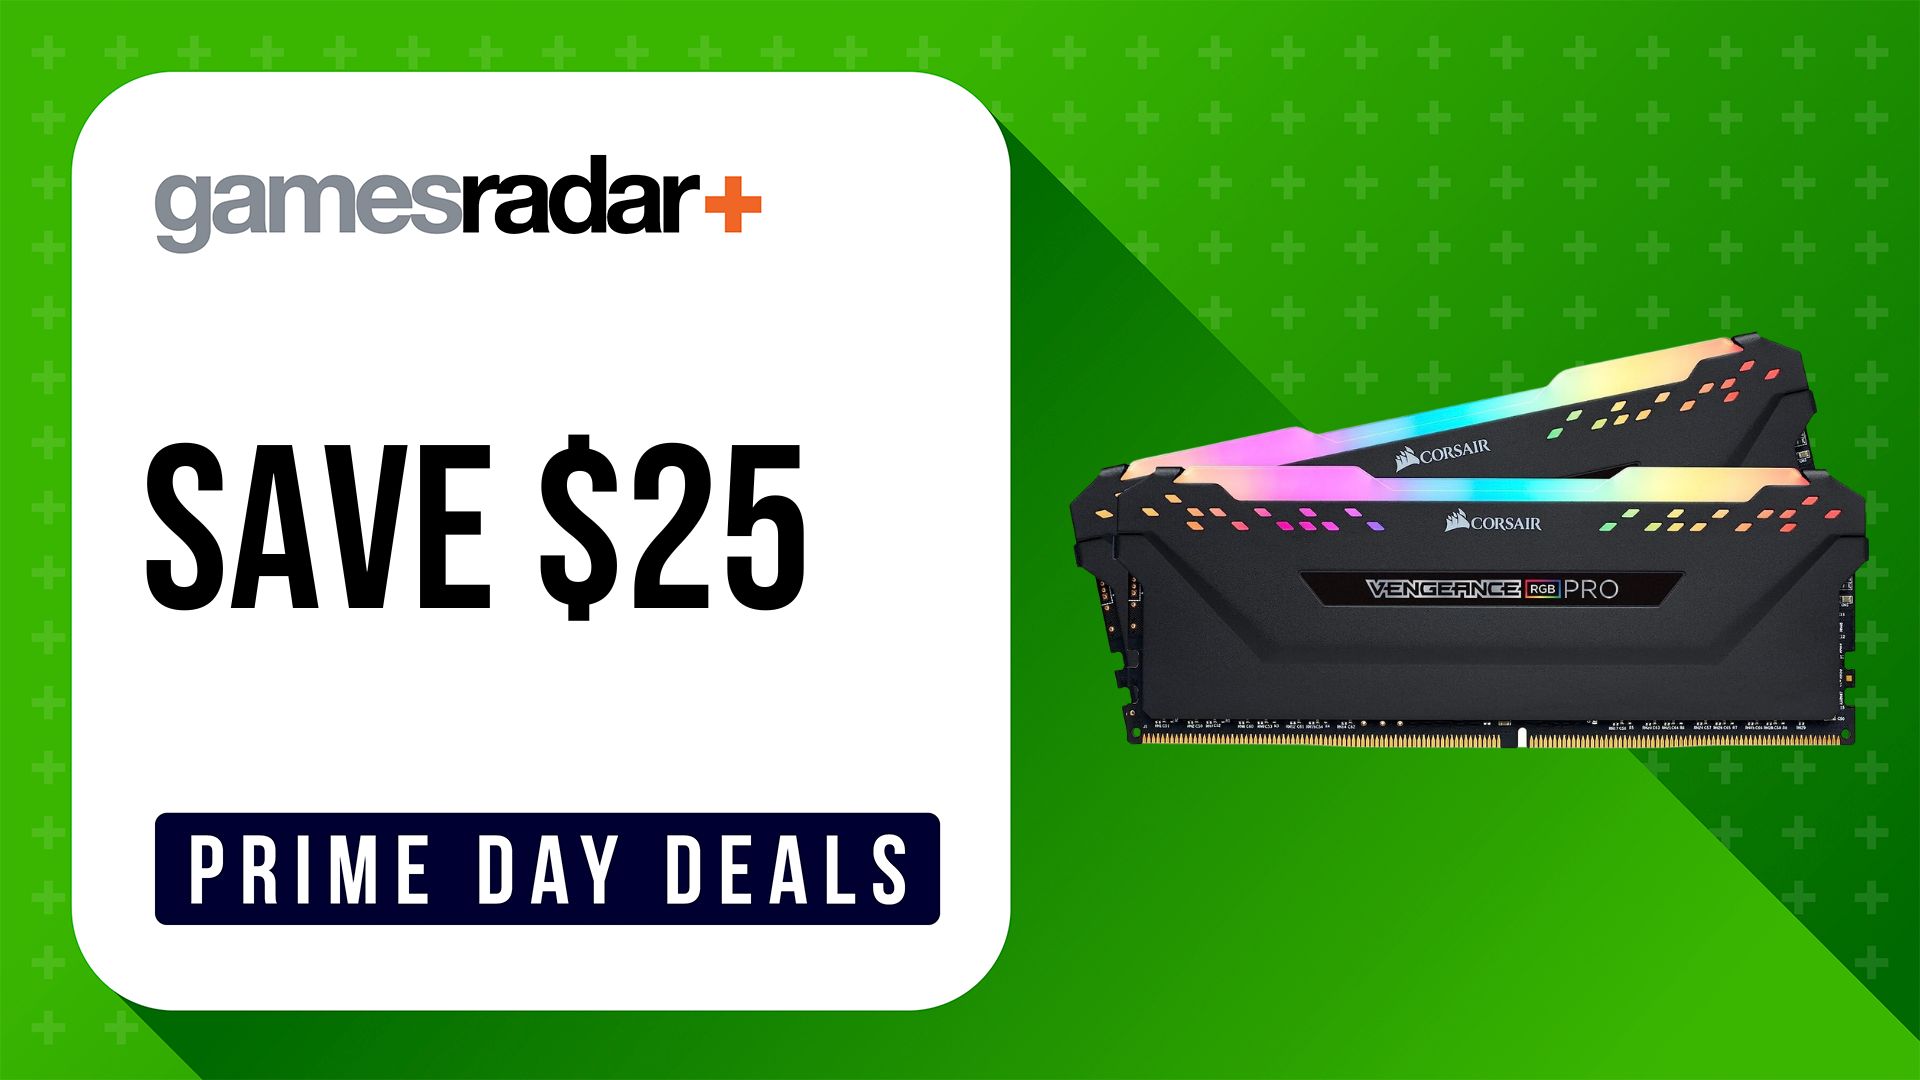 Corsair Vengeance RGB Pro DDR4 Prime Day gaming PC deals with $25 saving